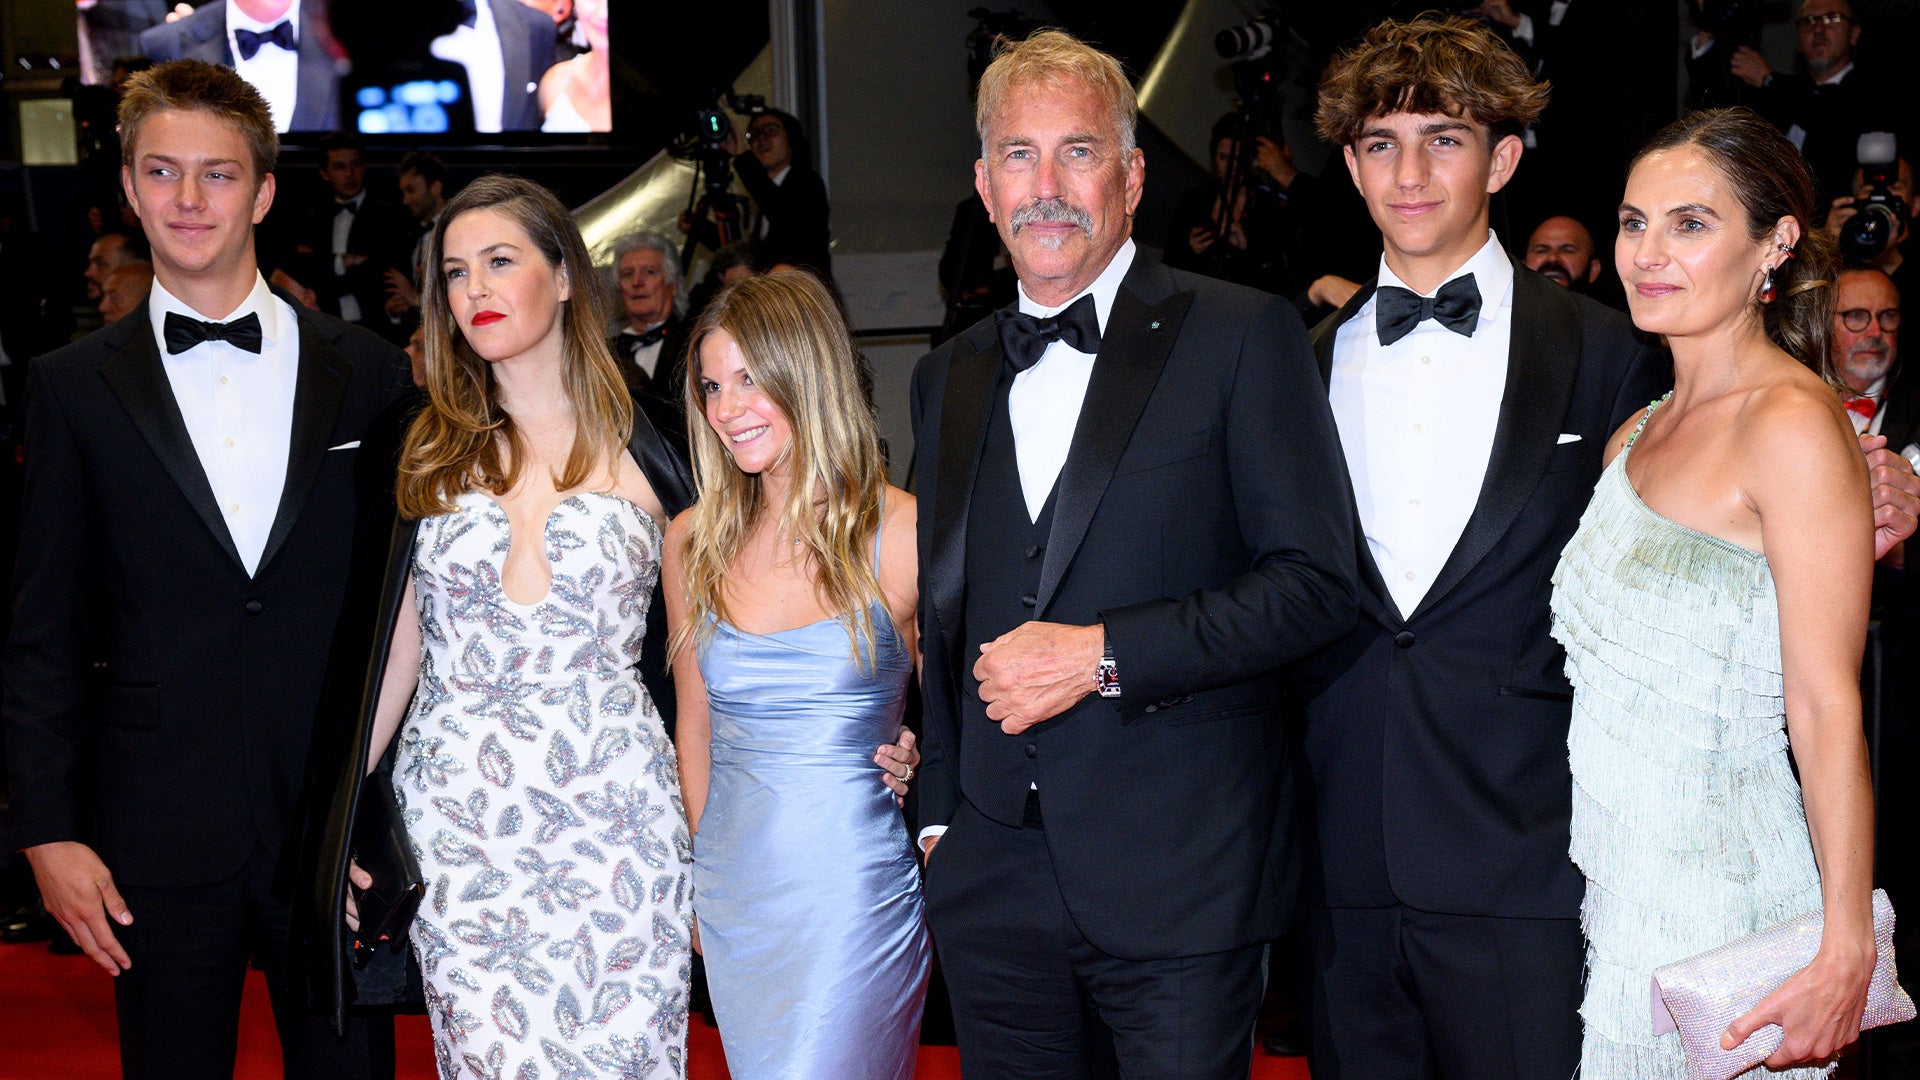 Watch Kevin Costner's Rare Appearance With 5 of His Kids at Cannes Film Festival